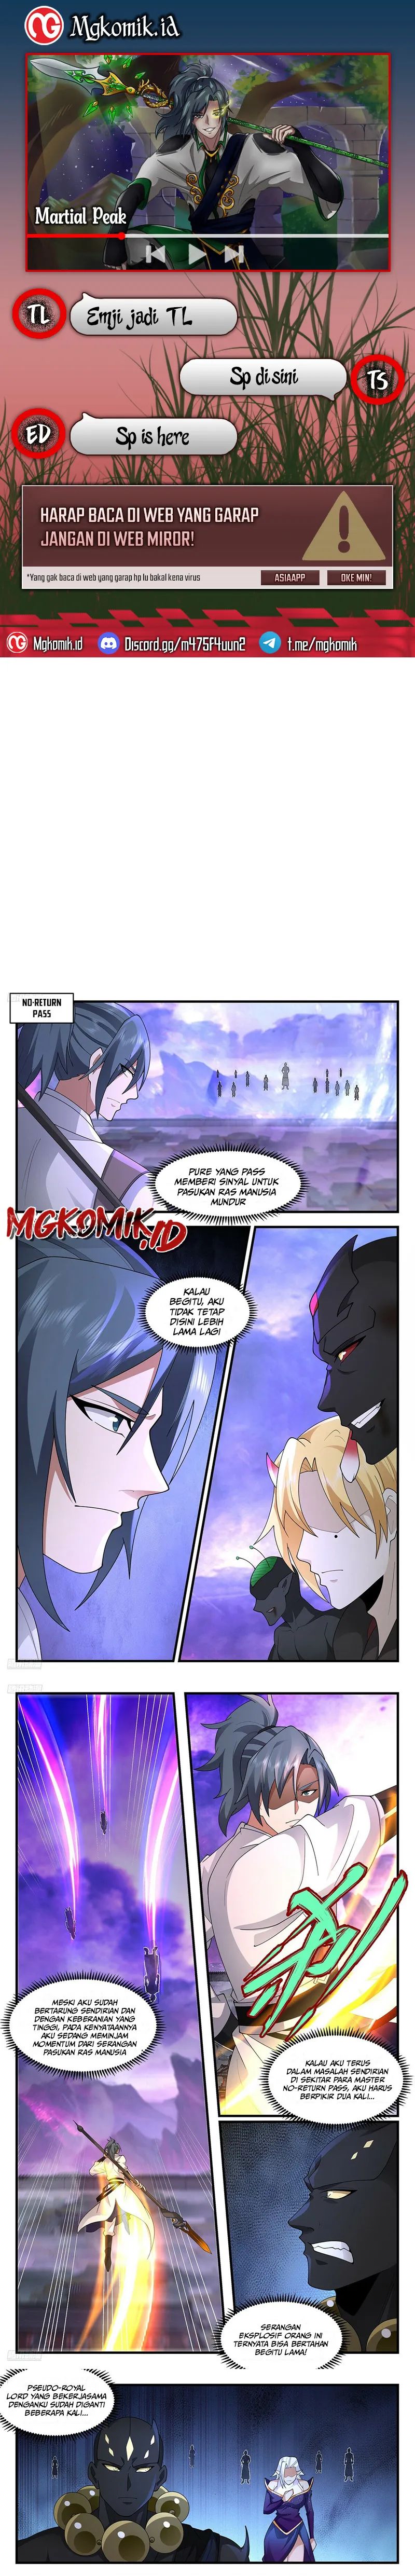 Martial Peak: Chapter 3685 - Page 1